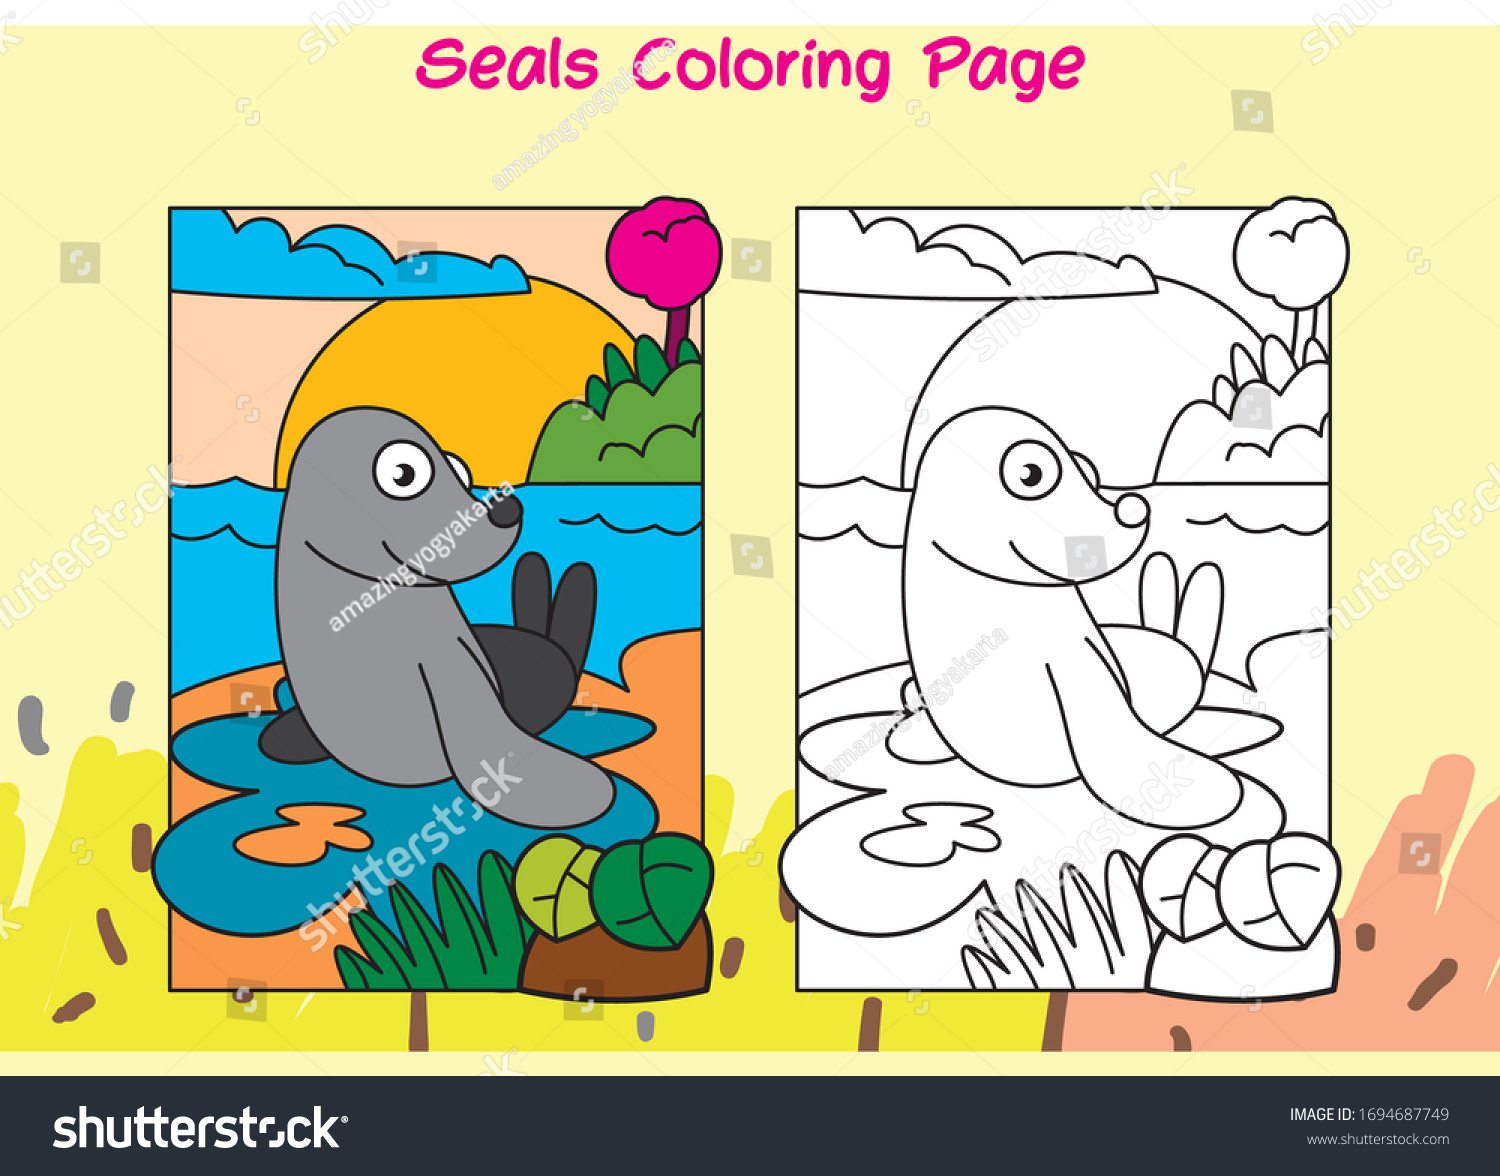 Seal Coloring Page Kids Sample Full Stock Vector Royalty Free ...